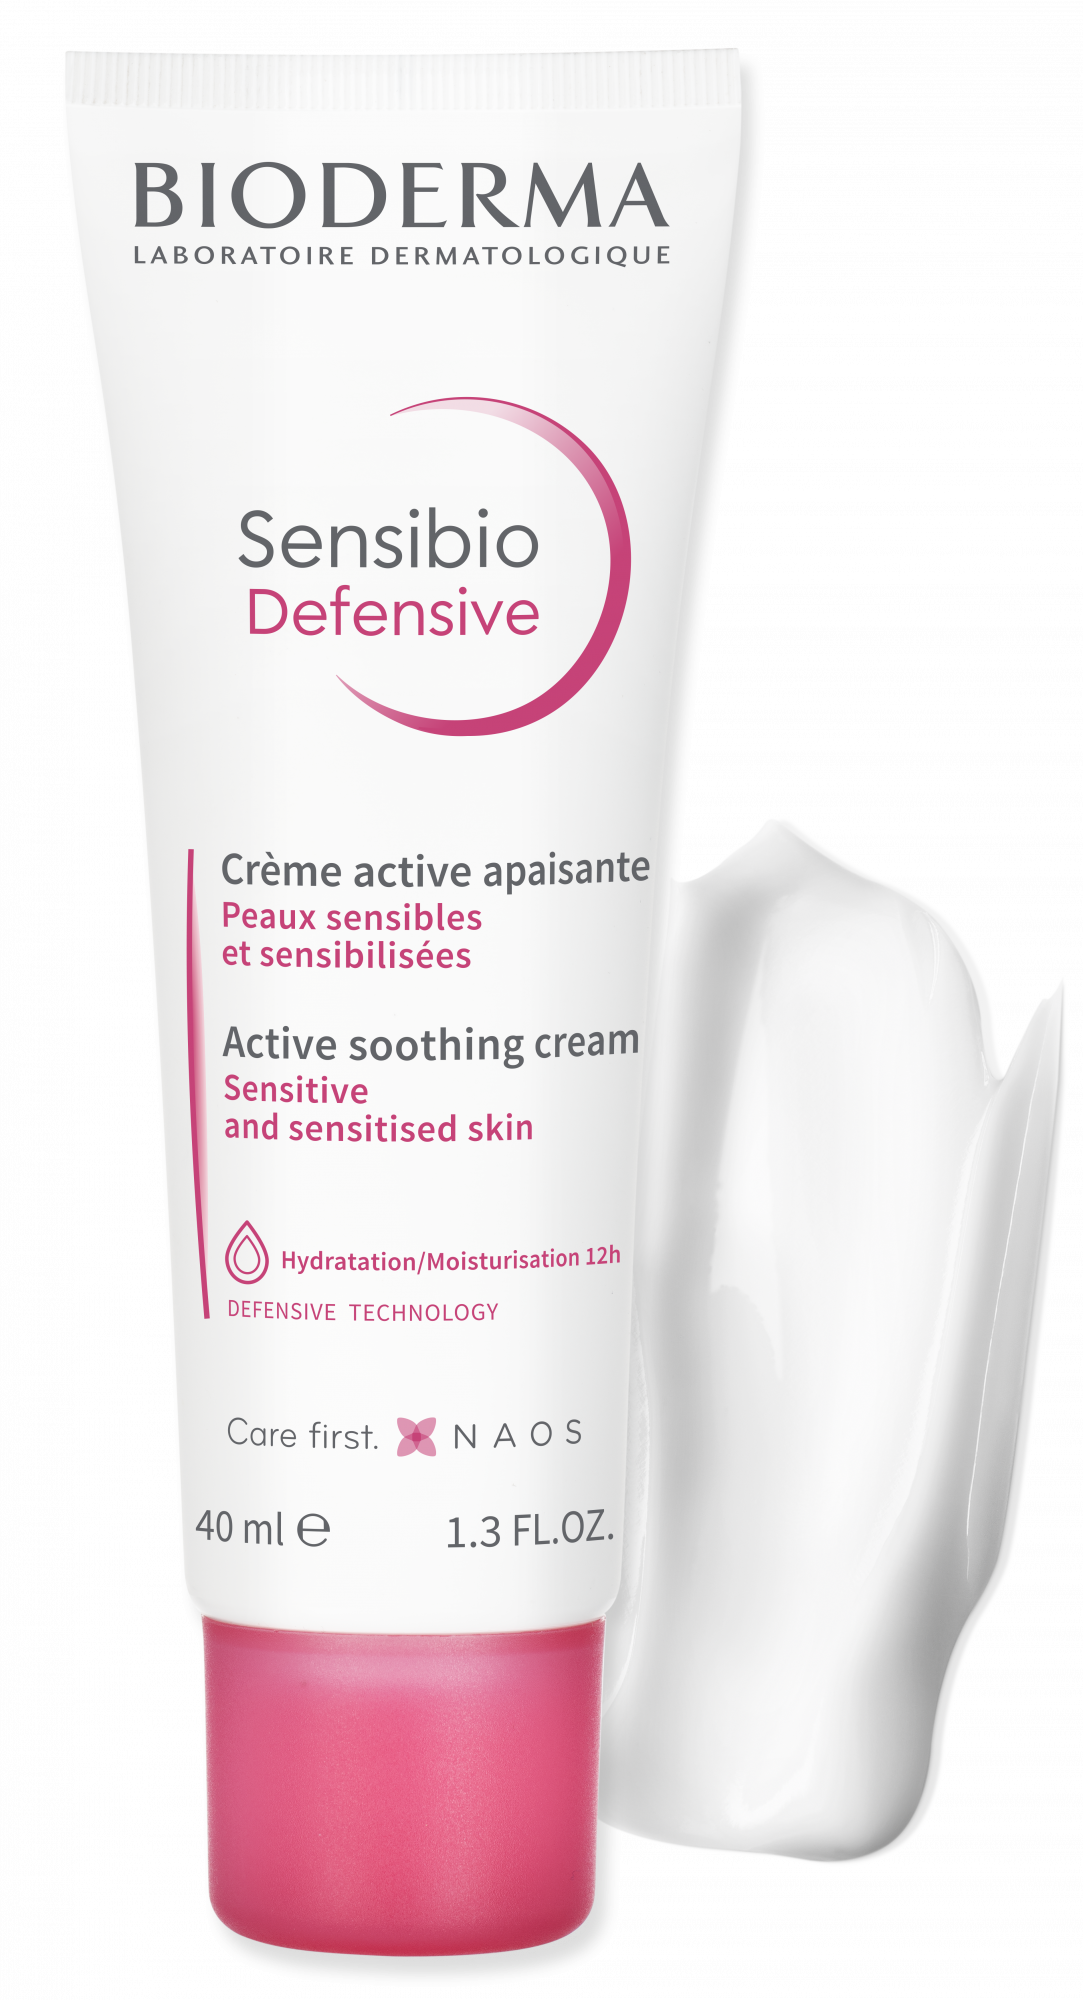 Sensibio Defensive  Active soothing cream for sensitive and